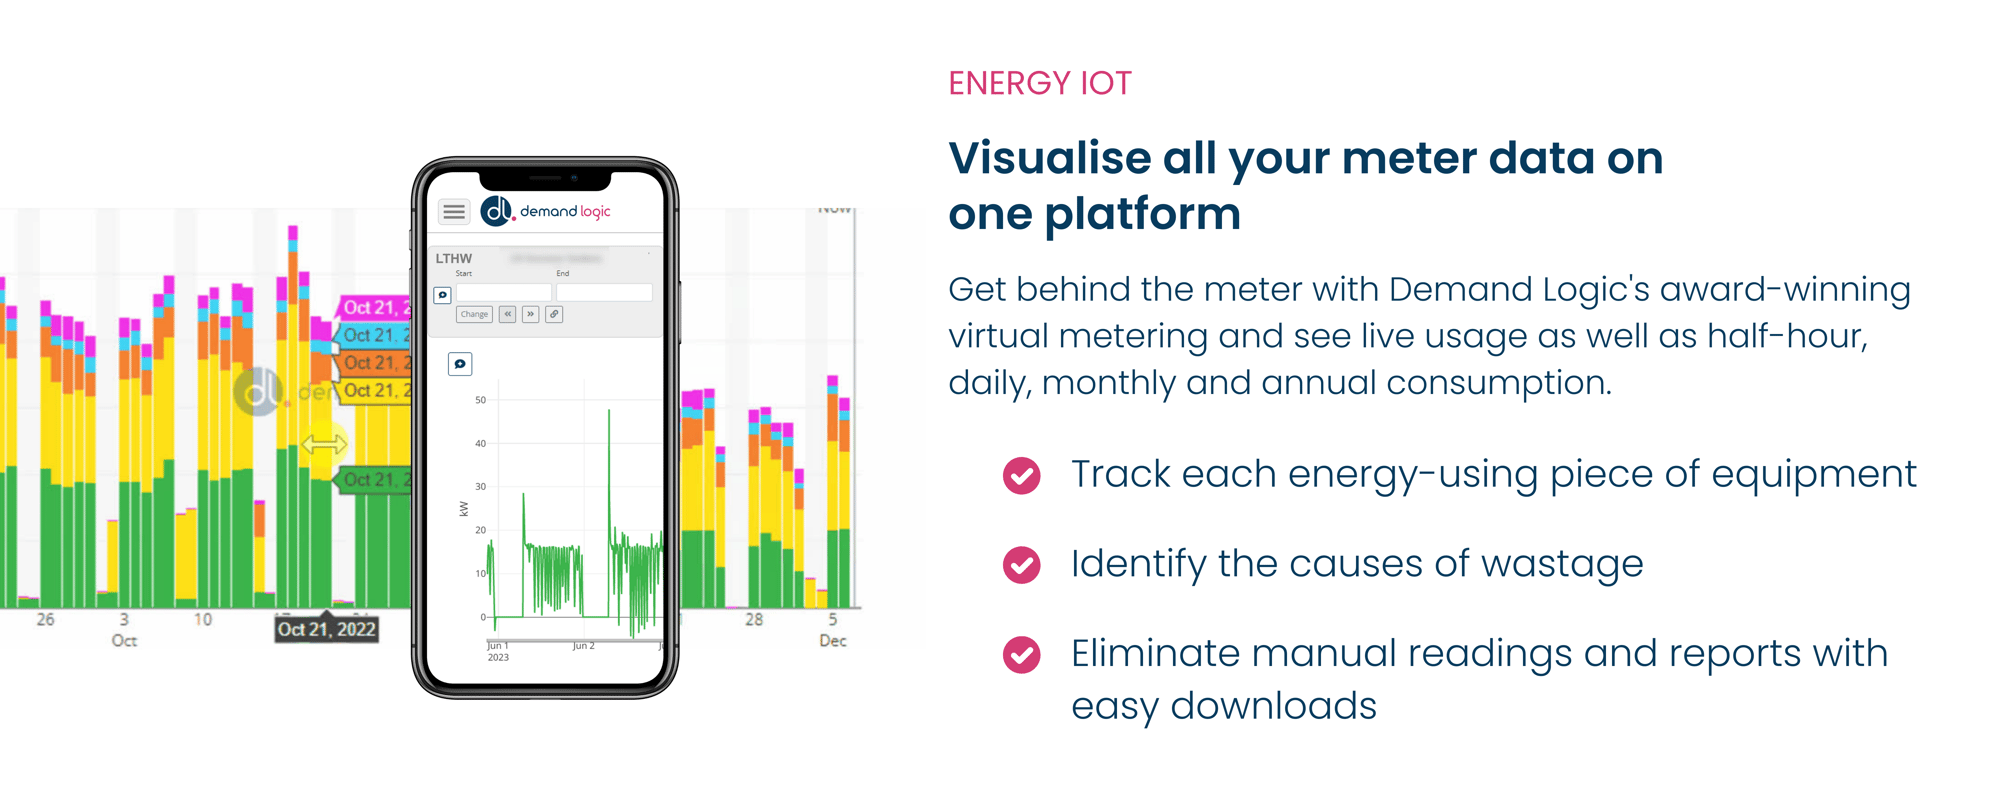 Visualise all your meter data on one platform